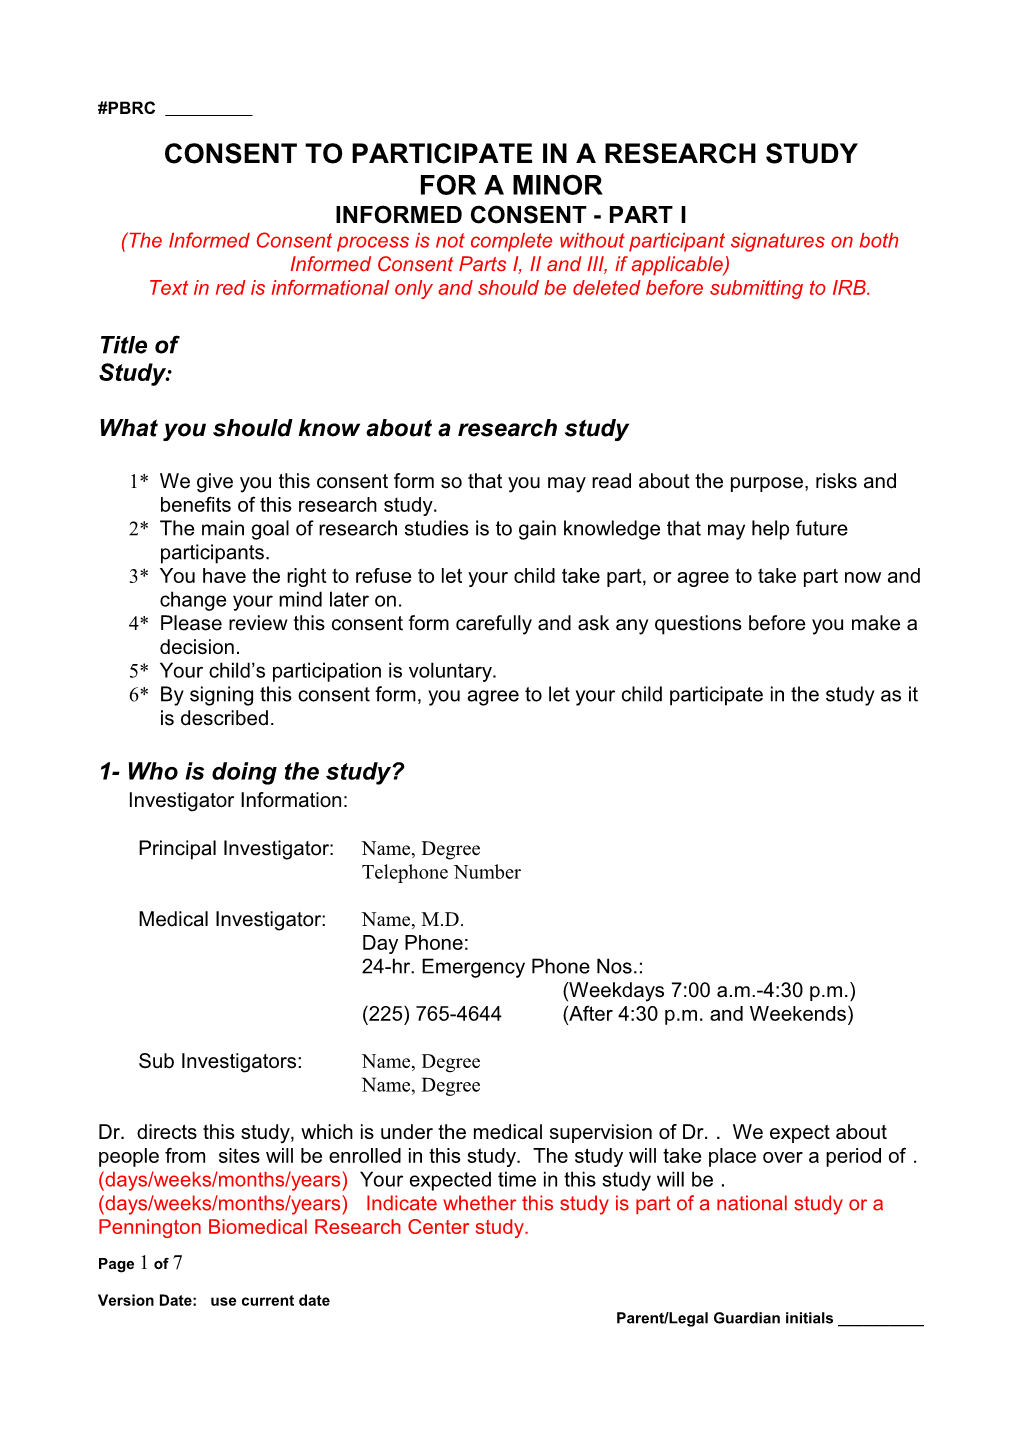 Consent to Participate in a Research Study